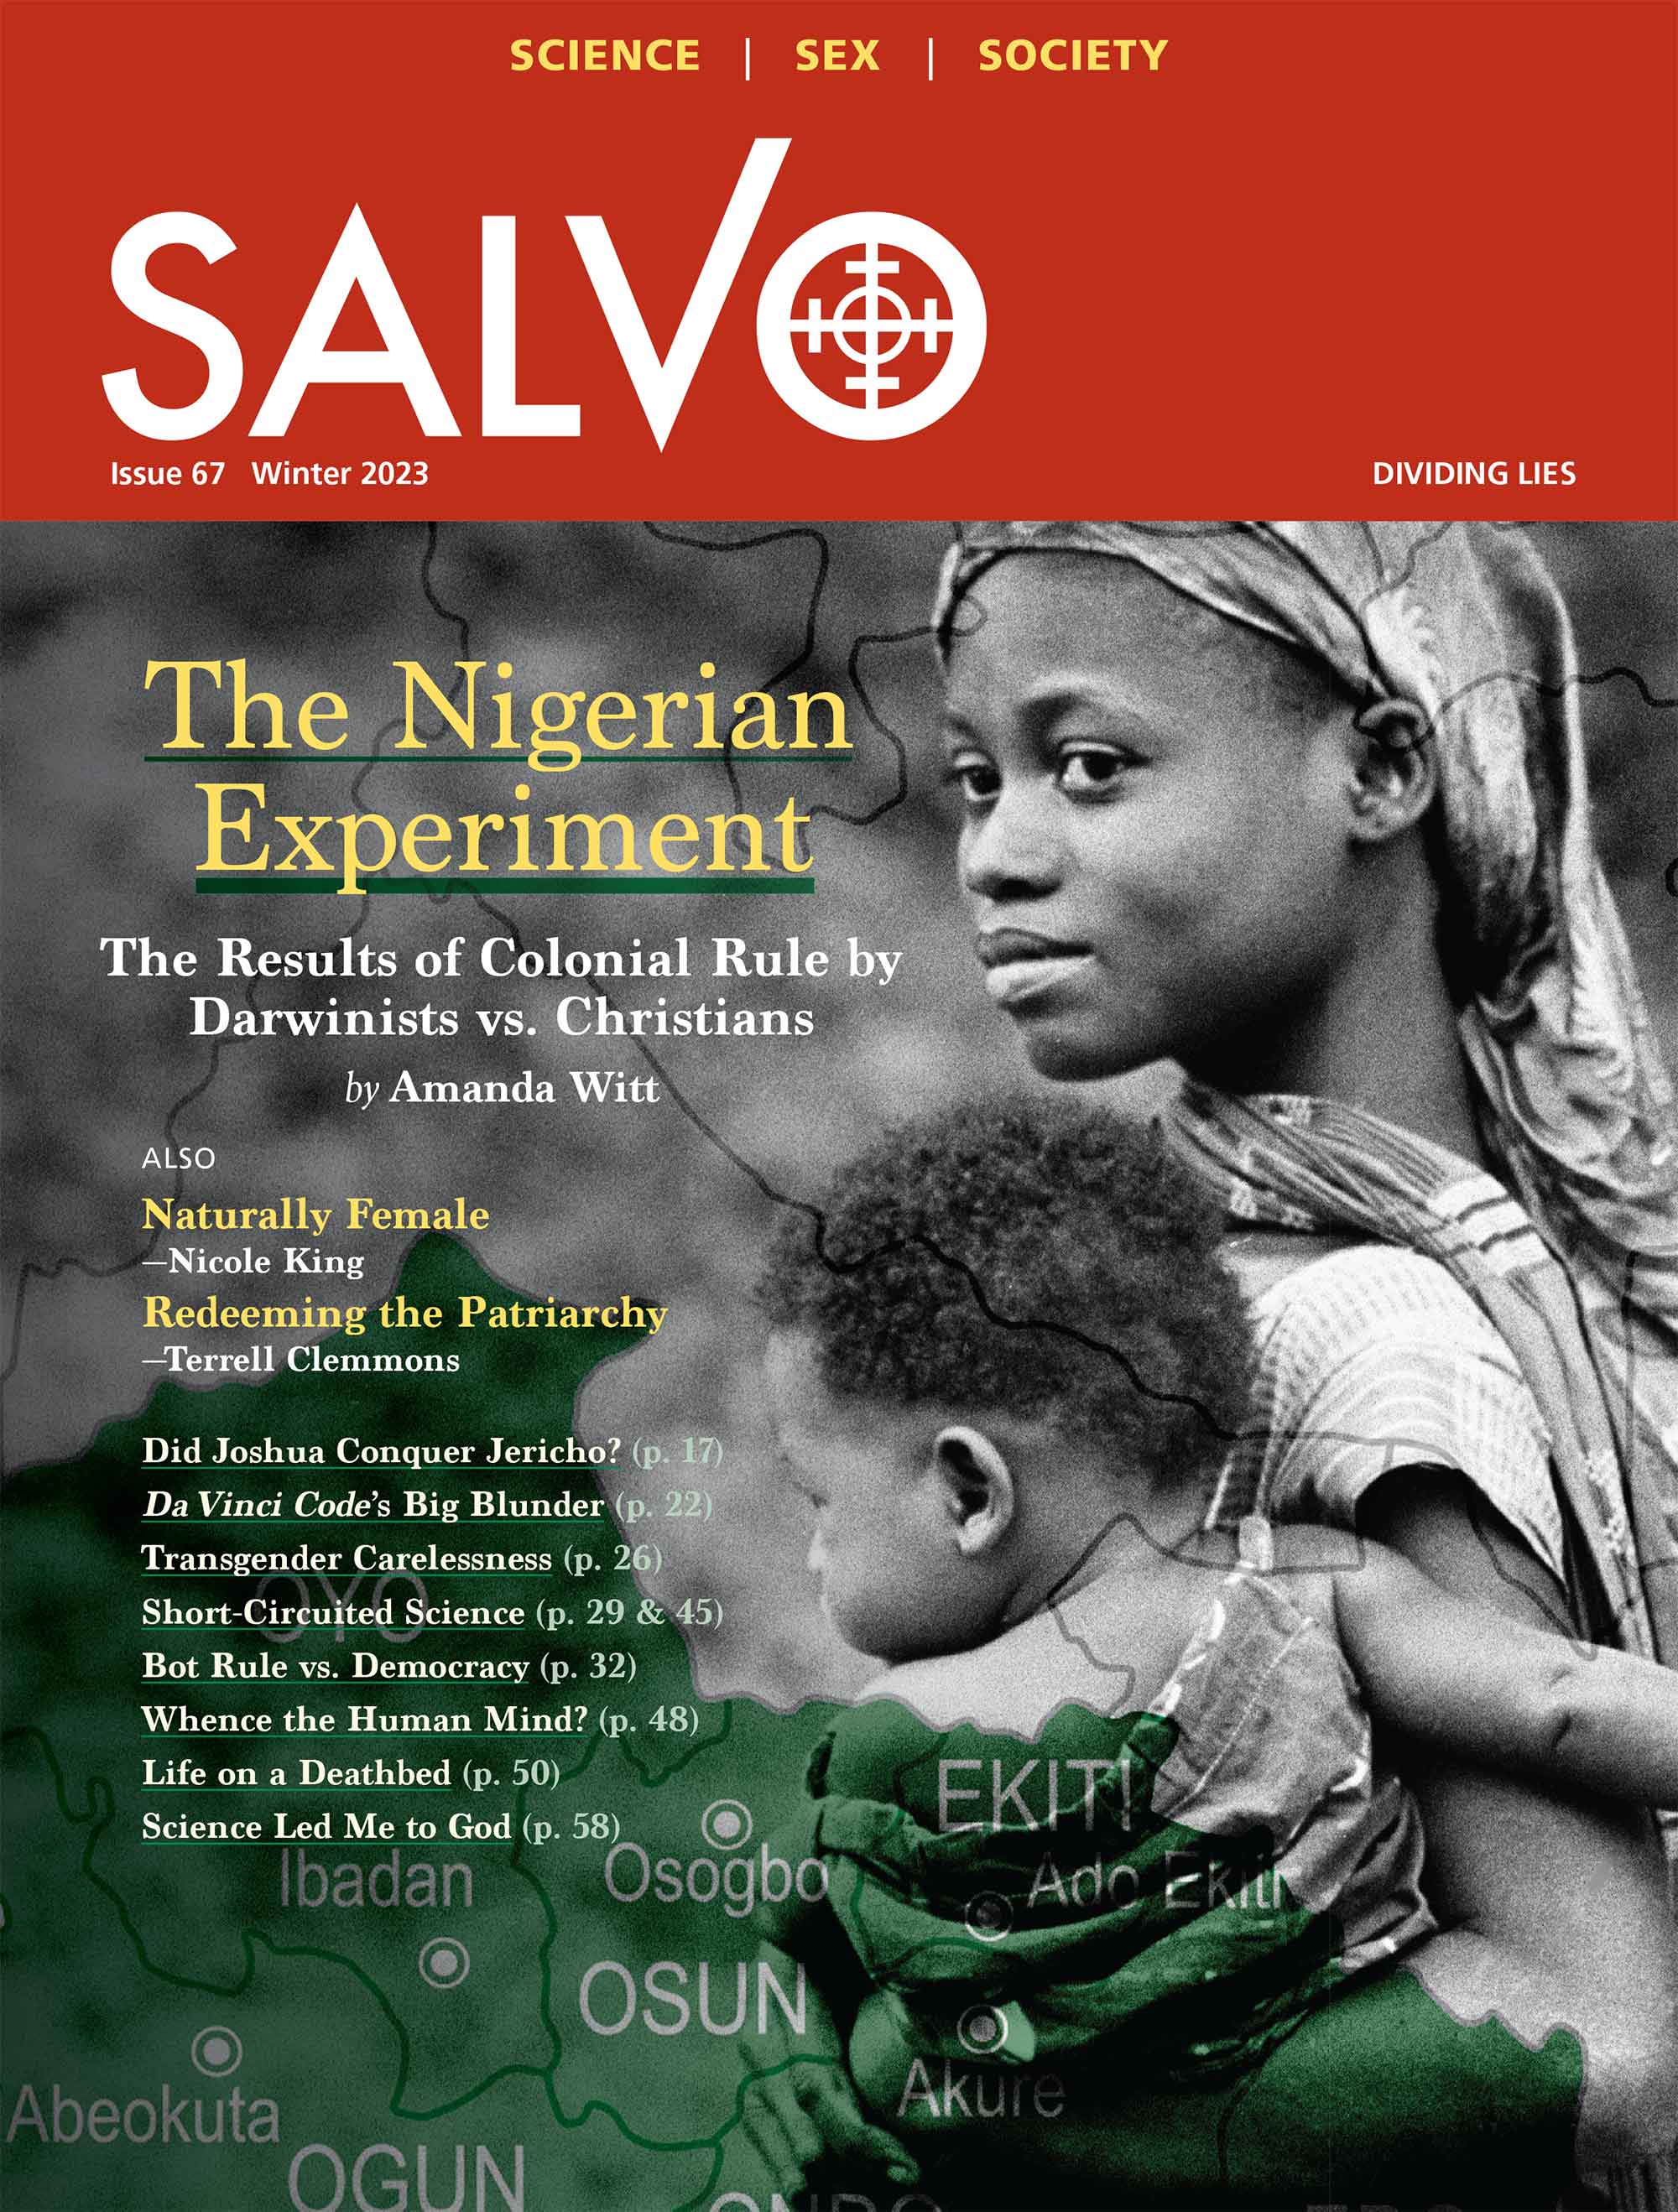 Current Issue Cover of Salvo Magazine